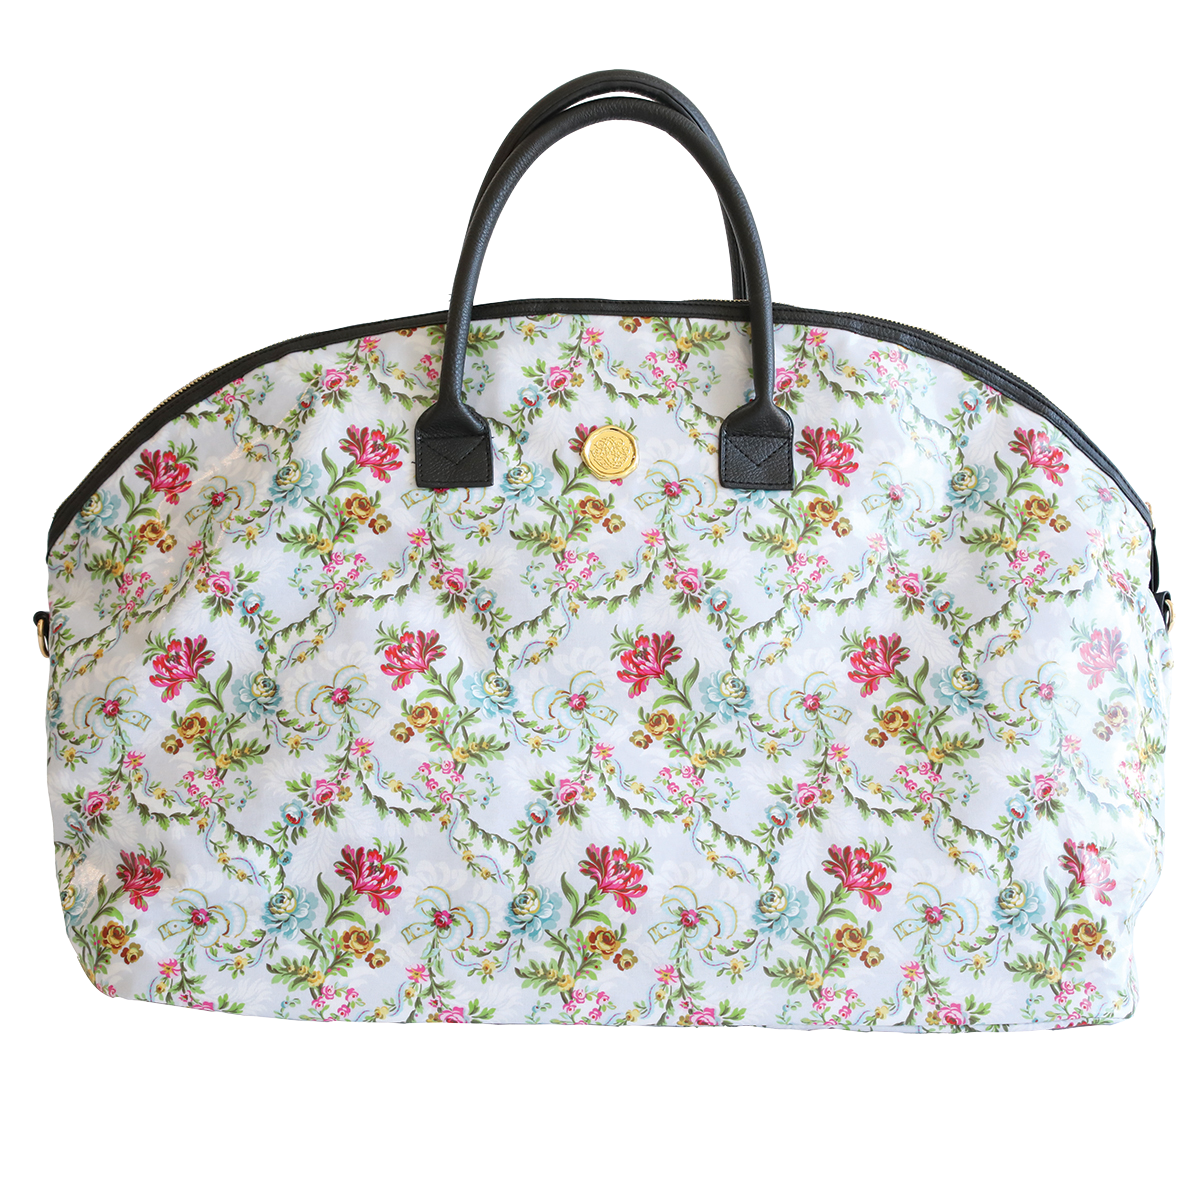 Phoebe Duffle Bag in floral-patterned, dome-shaped handbag with dark handles and a metallic clasp, featuring a nylon interior, isolated on a white background.